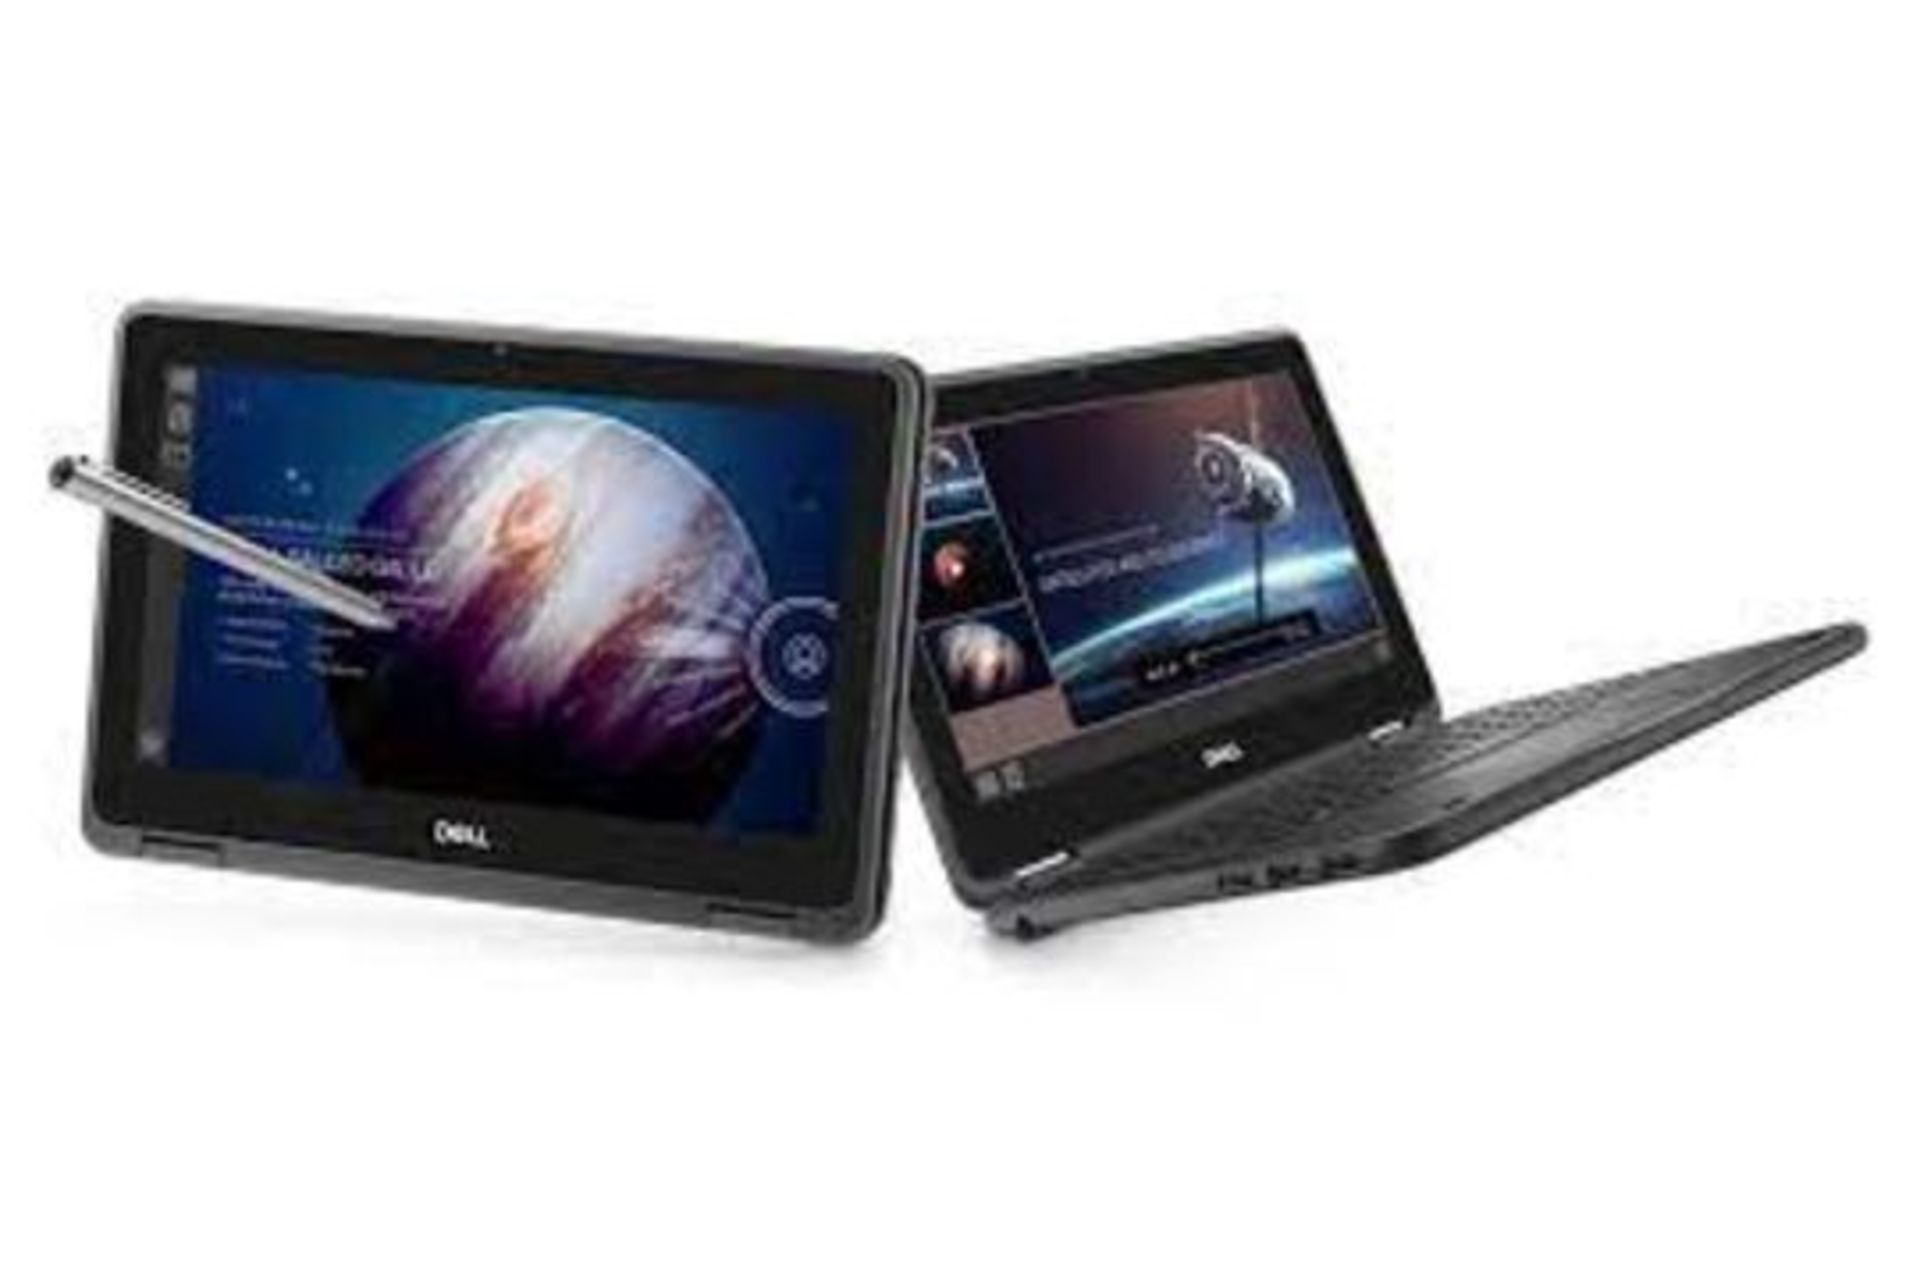 TRADE LOT 5 X NEW DELL LATITUDE 3190 TWO IN ONE LAPTOP TABLET RRP £495 EACH